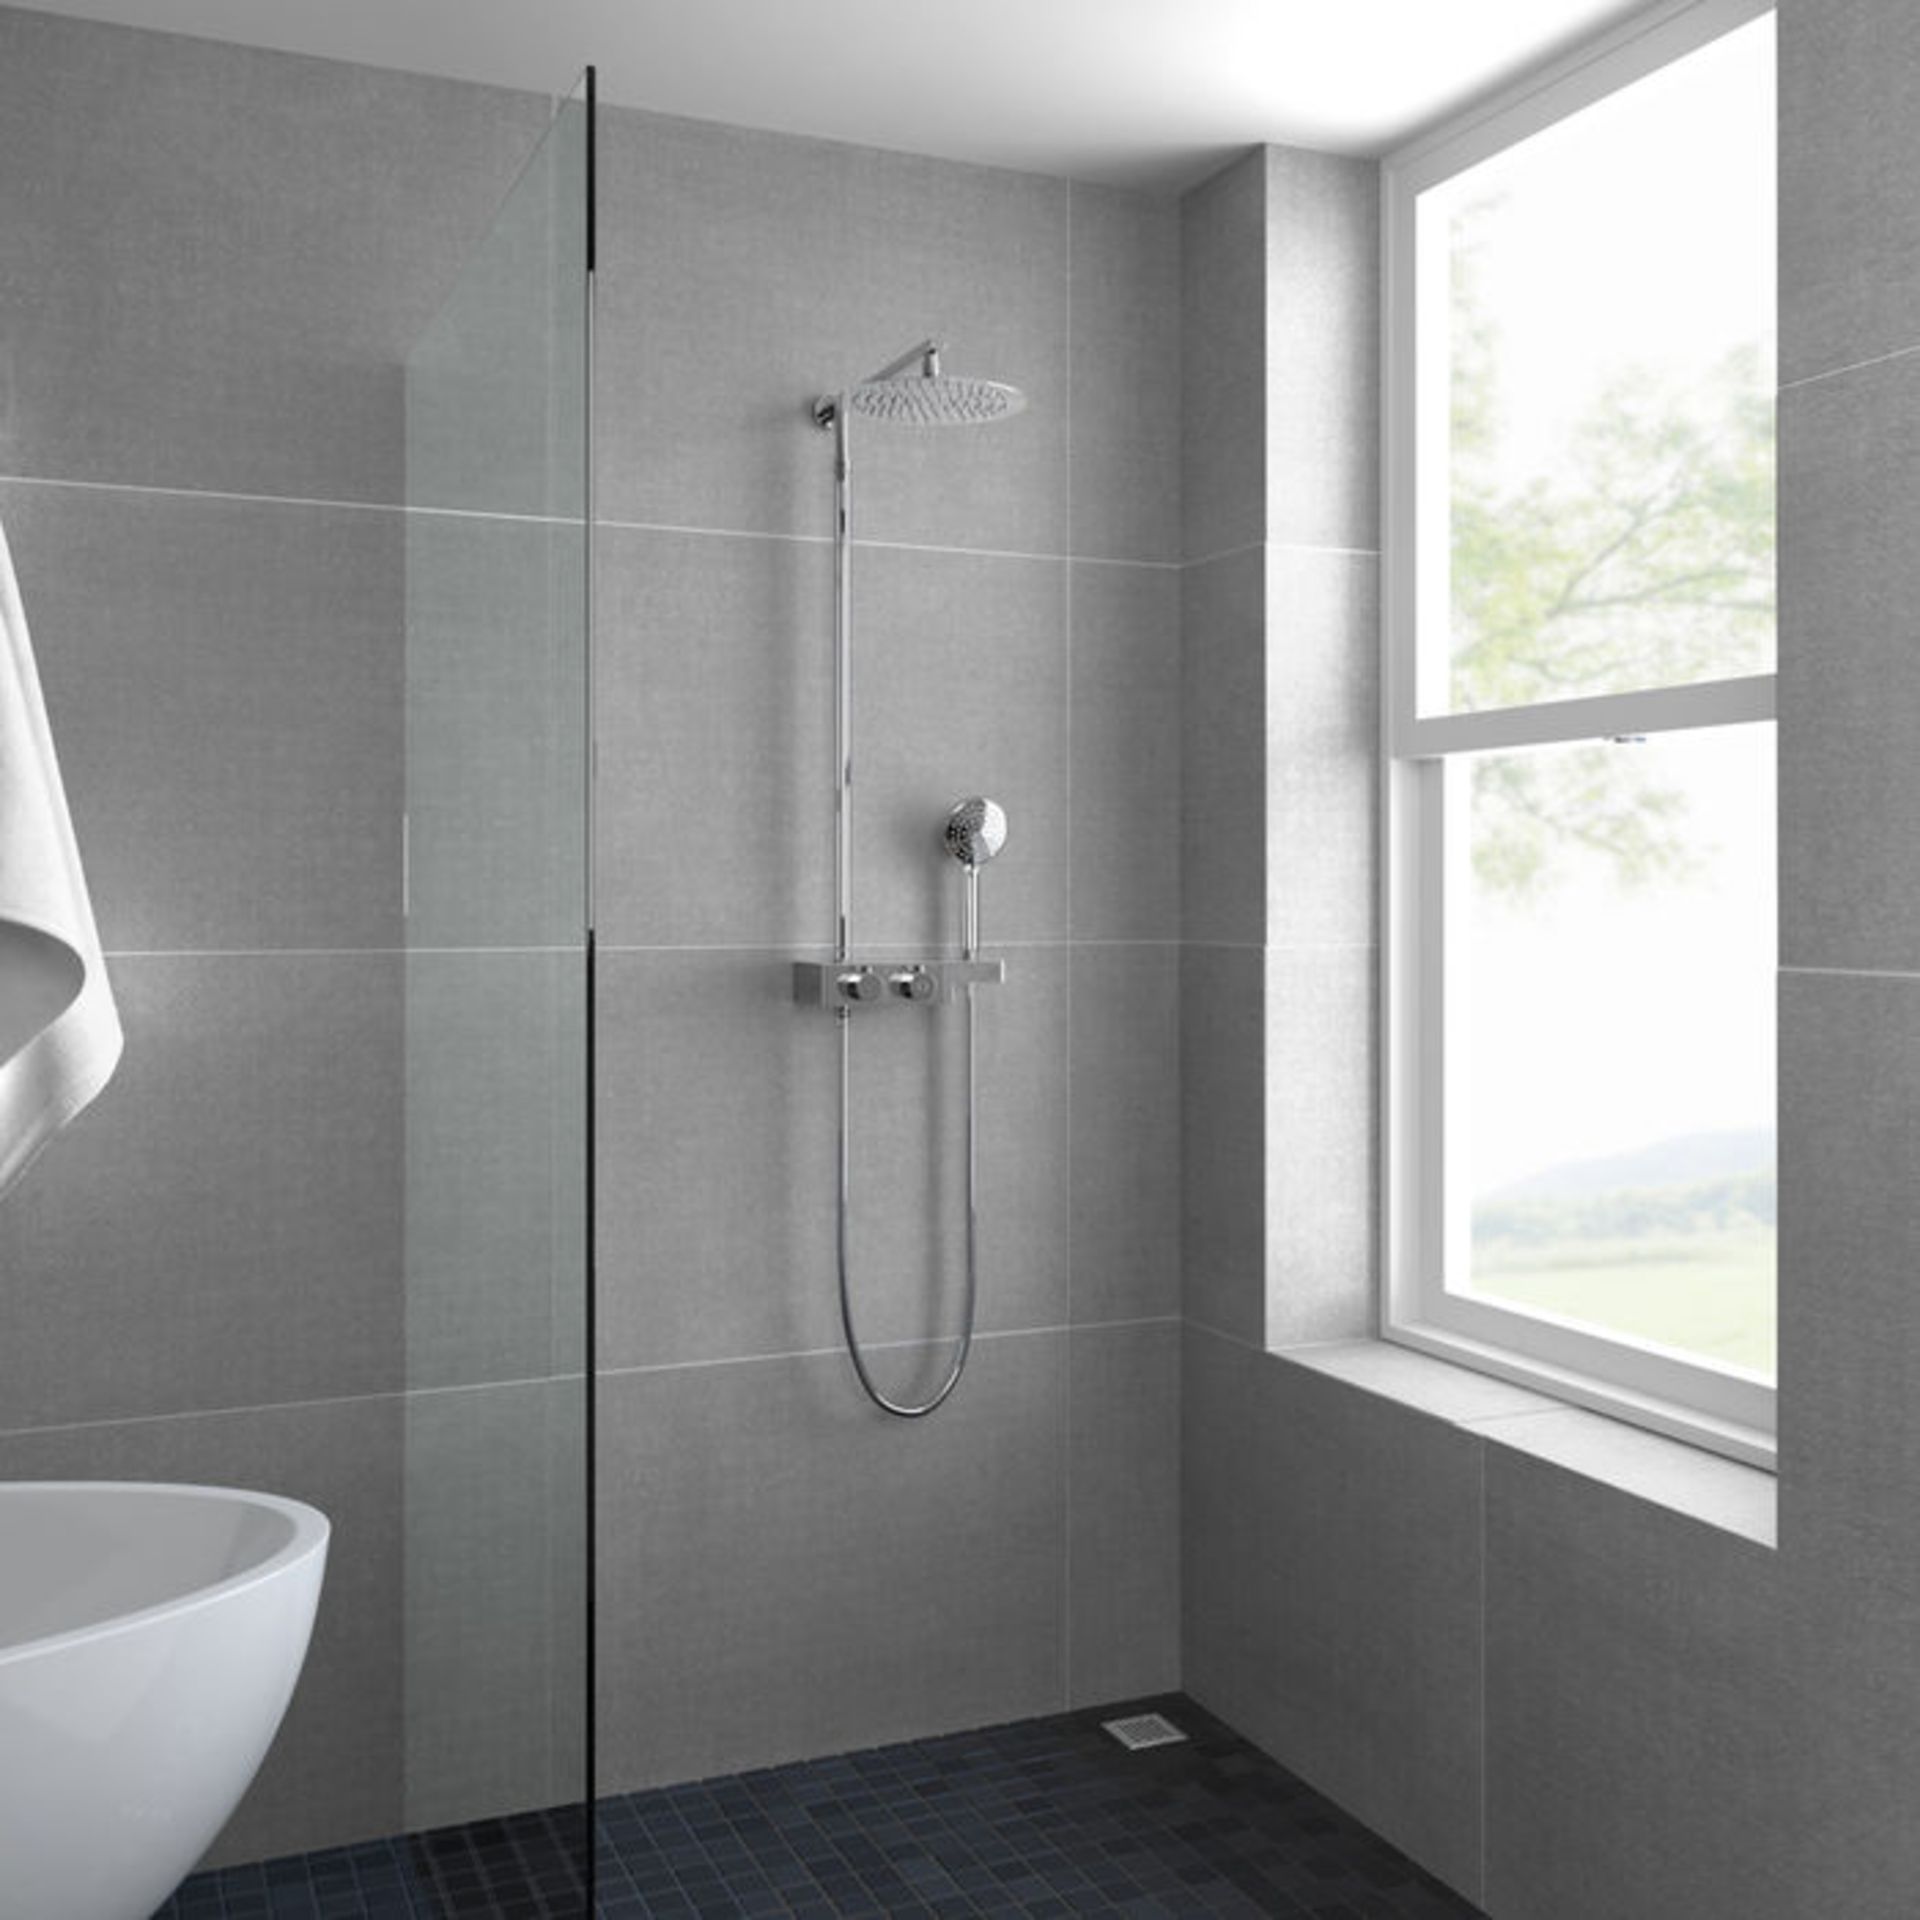 (SP87) Round Exposed Thermostatic Mixer Shower Kit & Large Head. Cool to touch shower for additional - Image 4 of 4